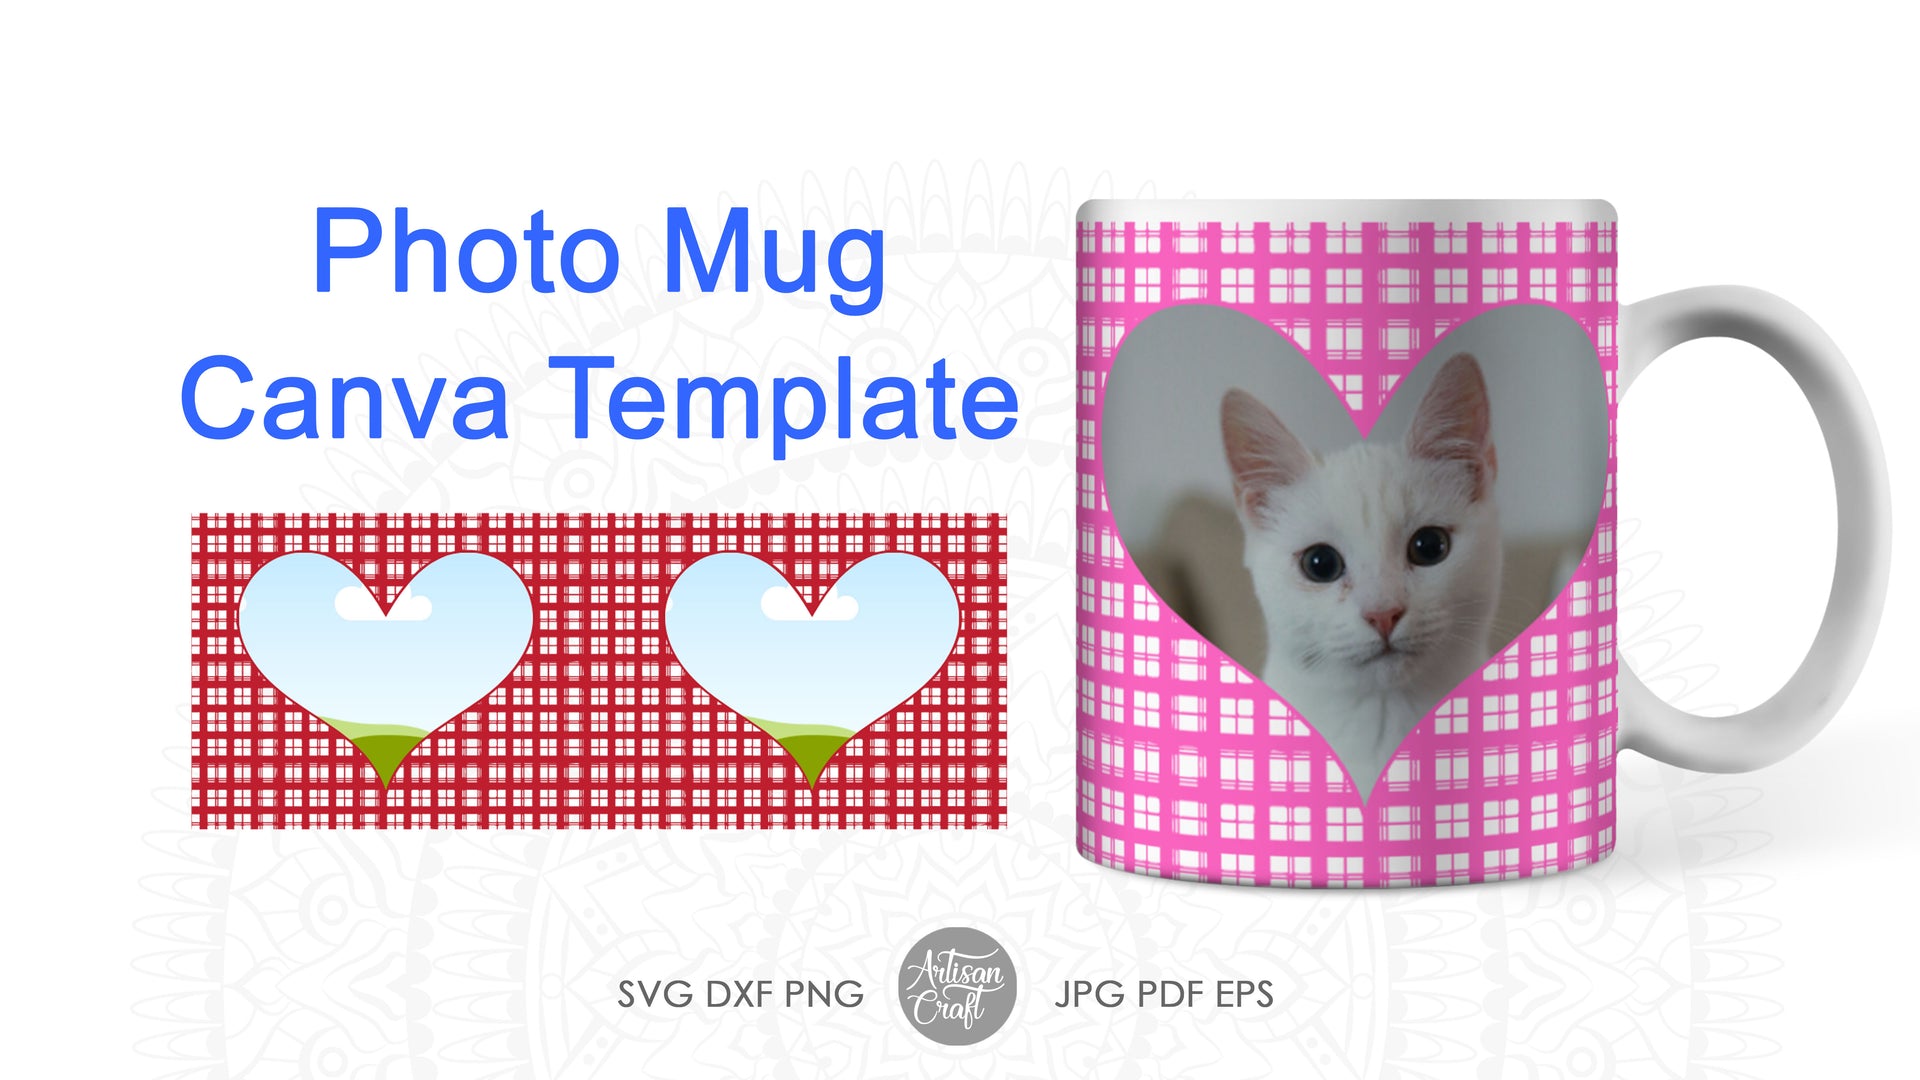 Load video: How to use Canva templates for sublimating photo mugs